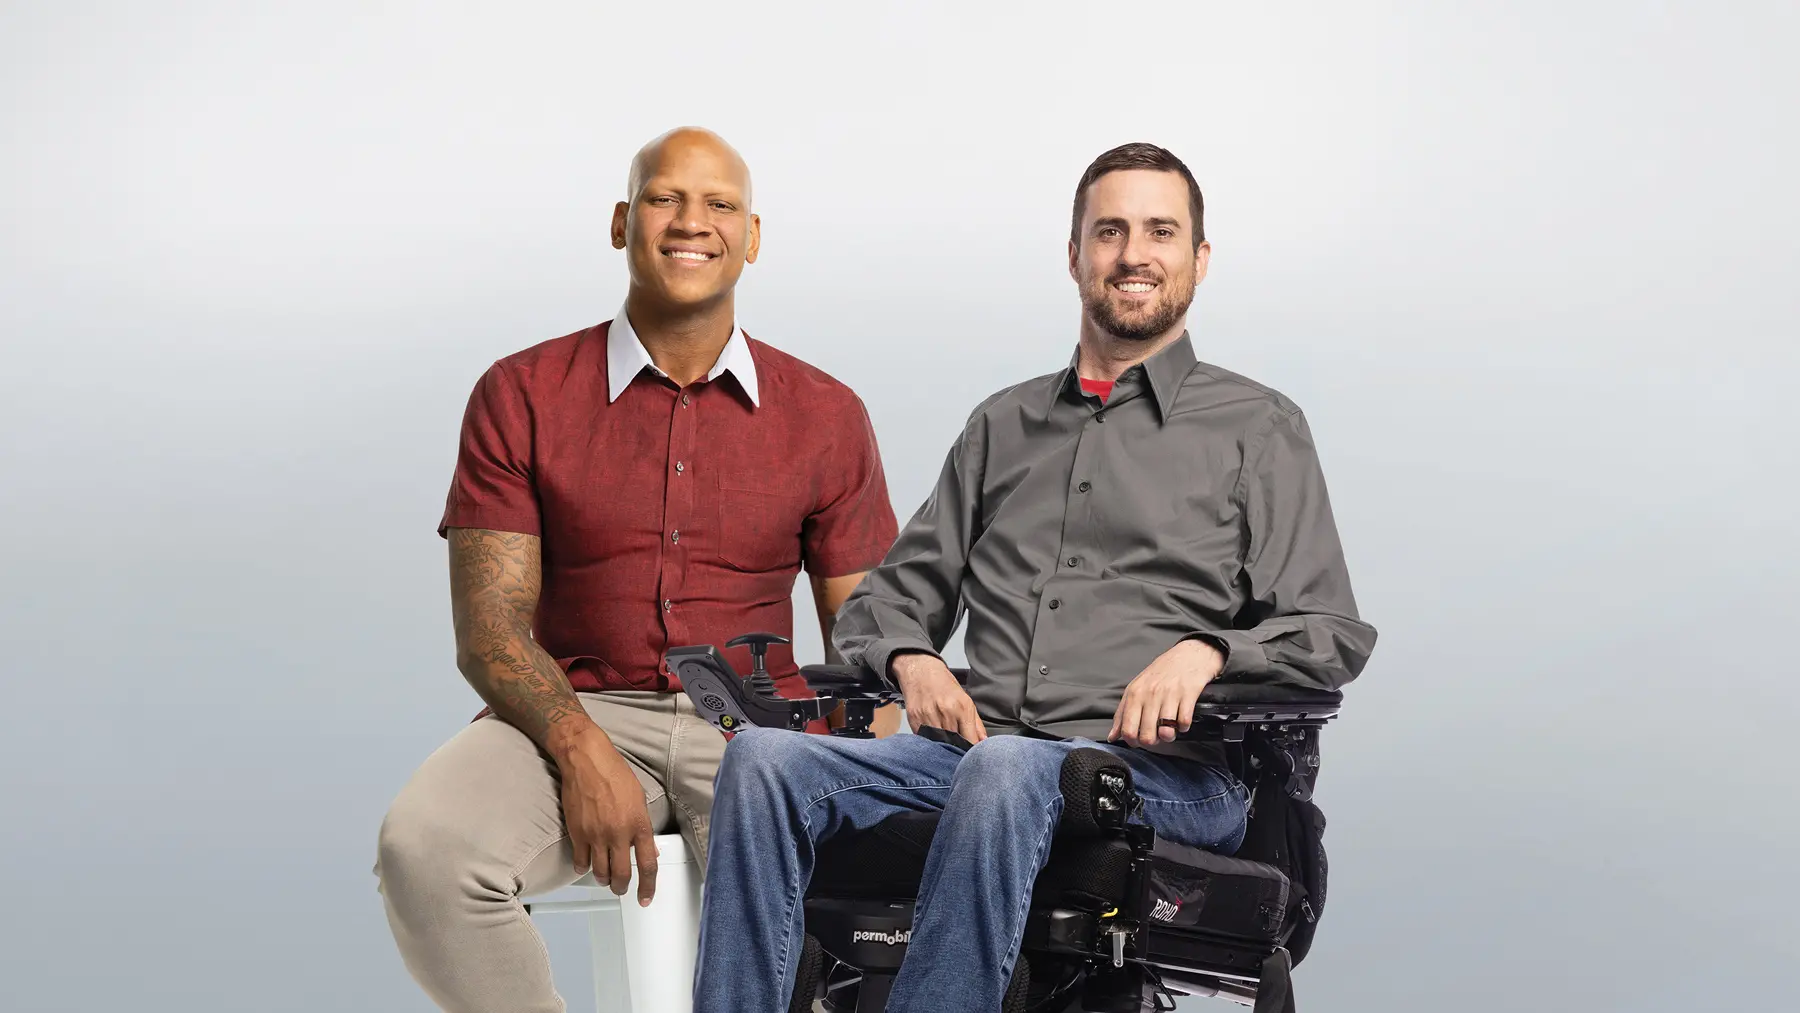 Two men sit next to each other smiling. On the left is a Black man on a stool wearing a short-sleeved button-down short that shows tattoos on his arms, a watch and shiny wedding ring. He casually rests his hands on his legs. On the right, a white bearded man in a motorized wheelchair wears a button-down shirt and a dark wedding ring.